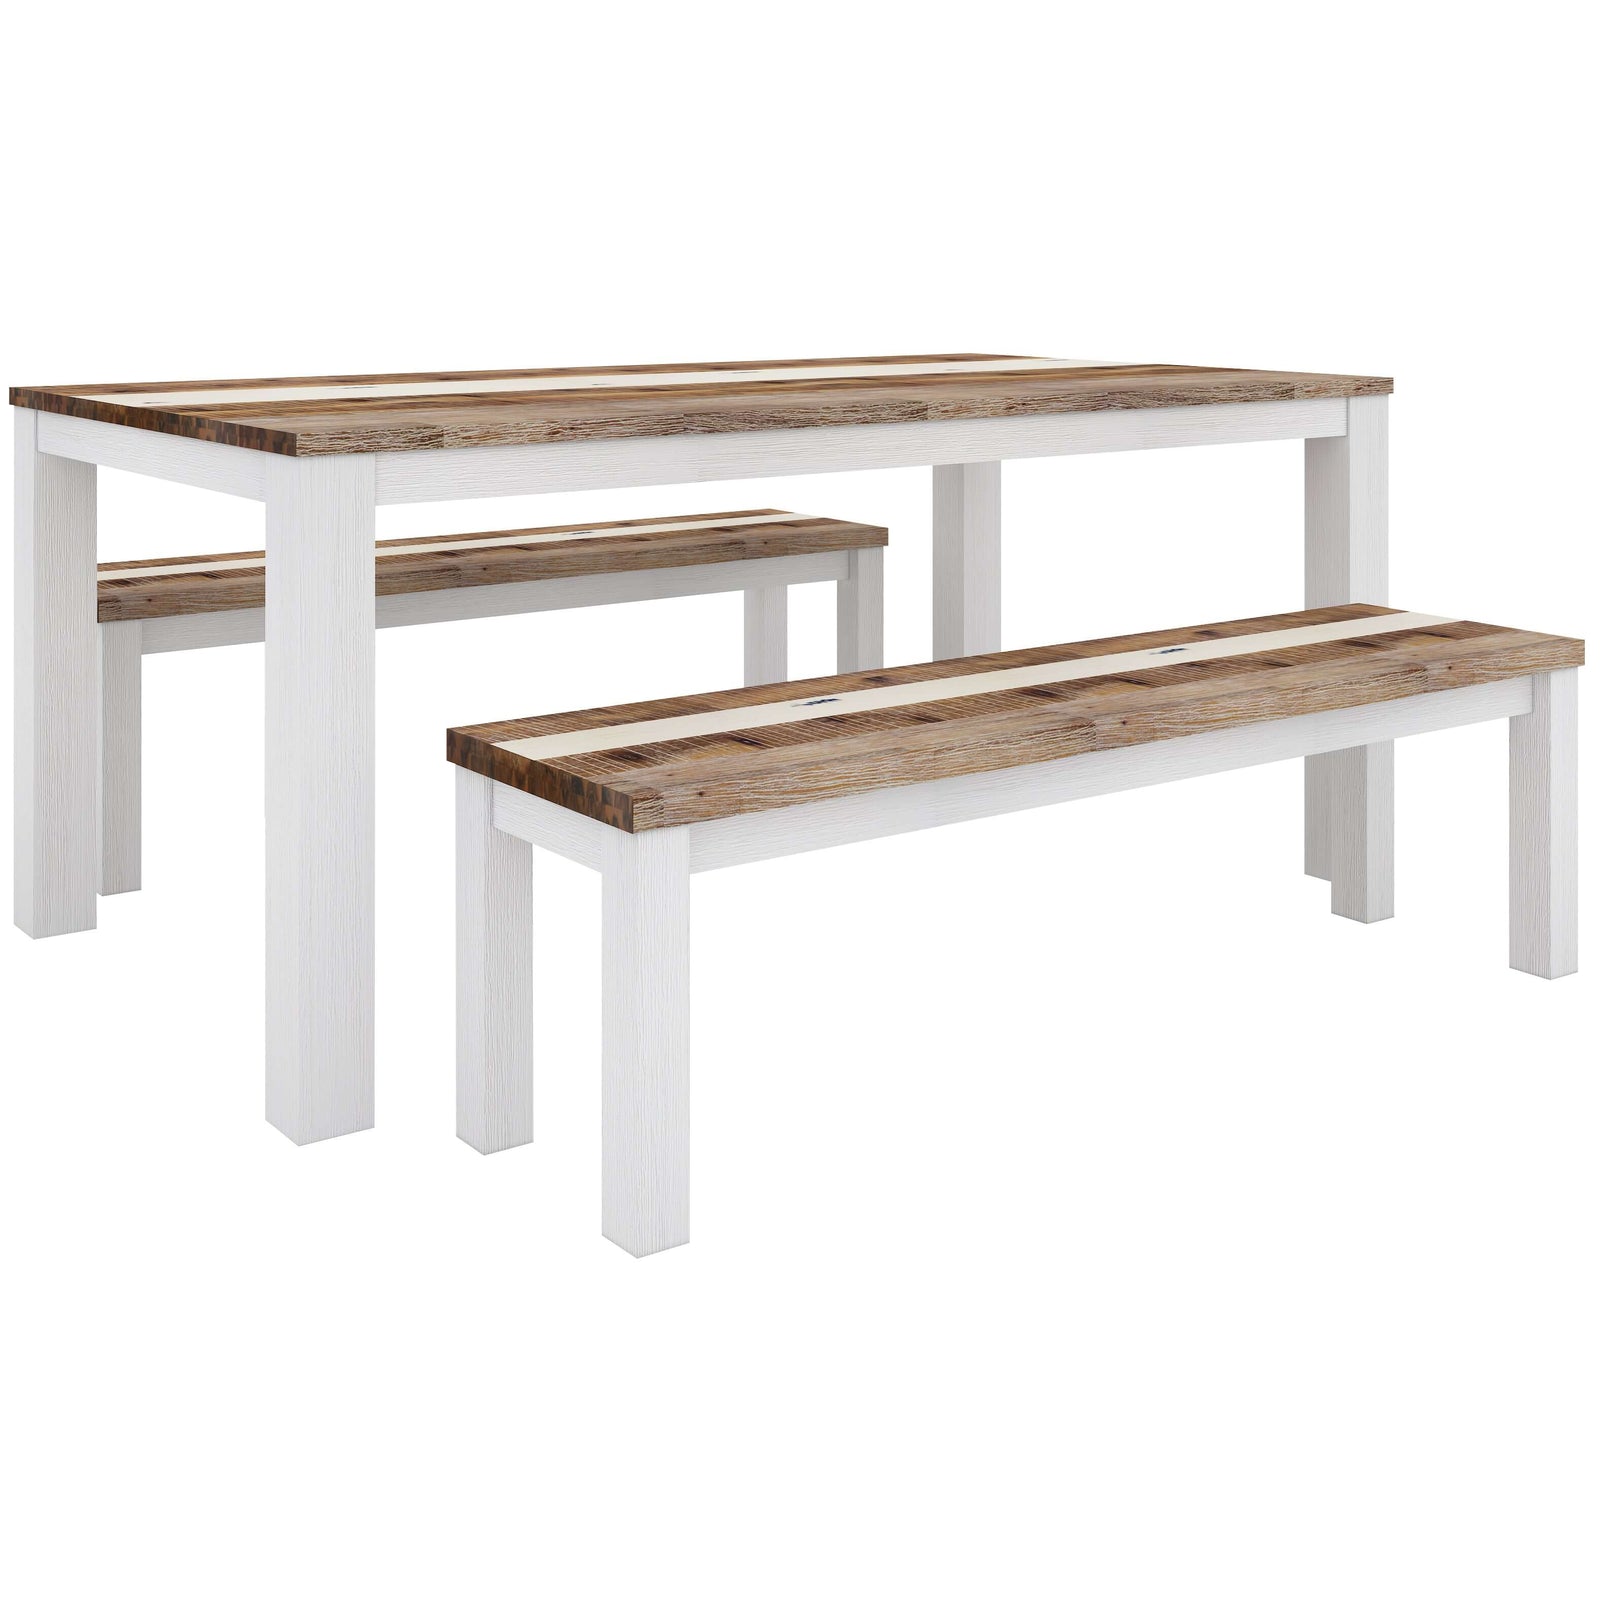 Orville 3pc Dining Set 1.8m Table 1.5m Bench Solid Acacia Timber - Multi Color-Upinteriors